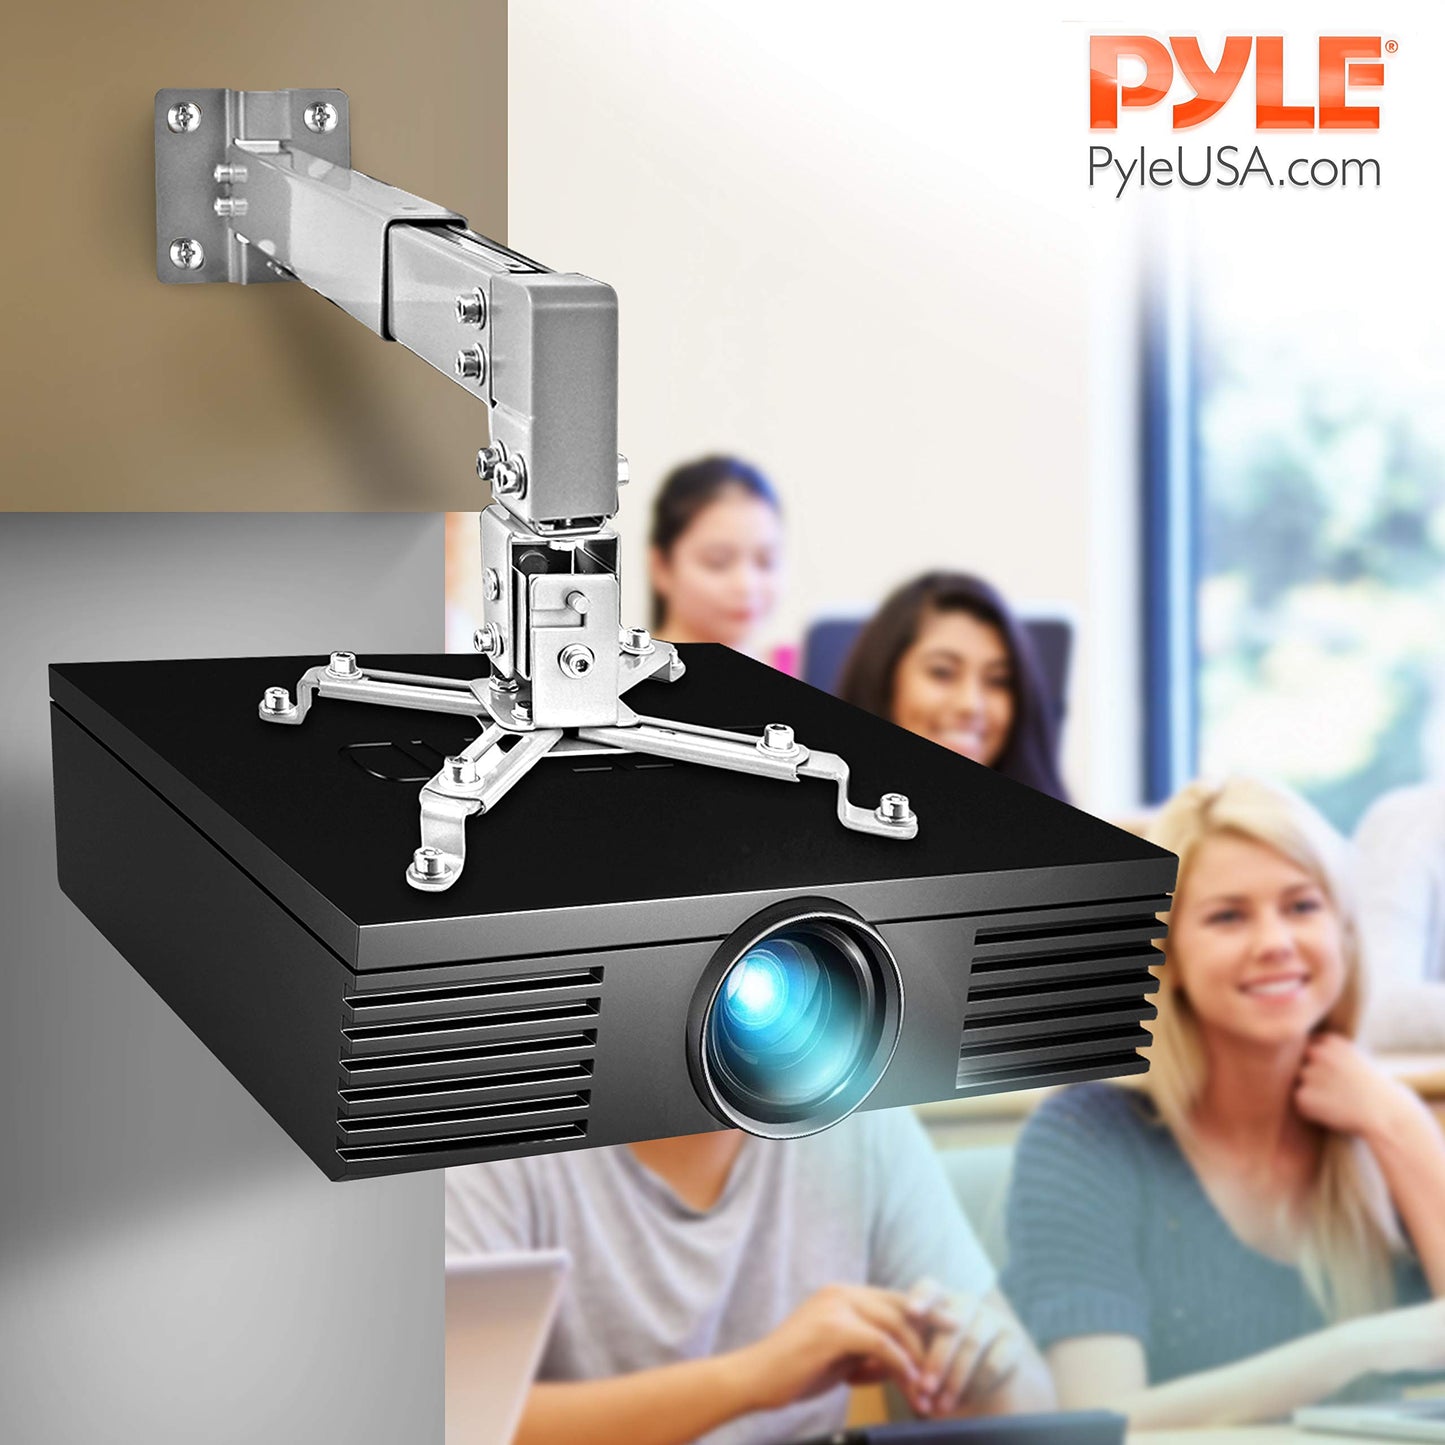 Pyle Projector Wall Mount Bracket - Overhead Projector Holder Kit w/Pitch Roll, Horizontal Vertical Adjustment, Retractable Telescopic Arm - Home Movie Theater/Video Film Showing - Pyle PRJWM8